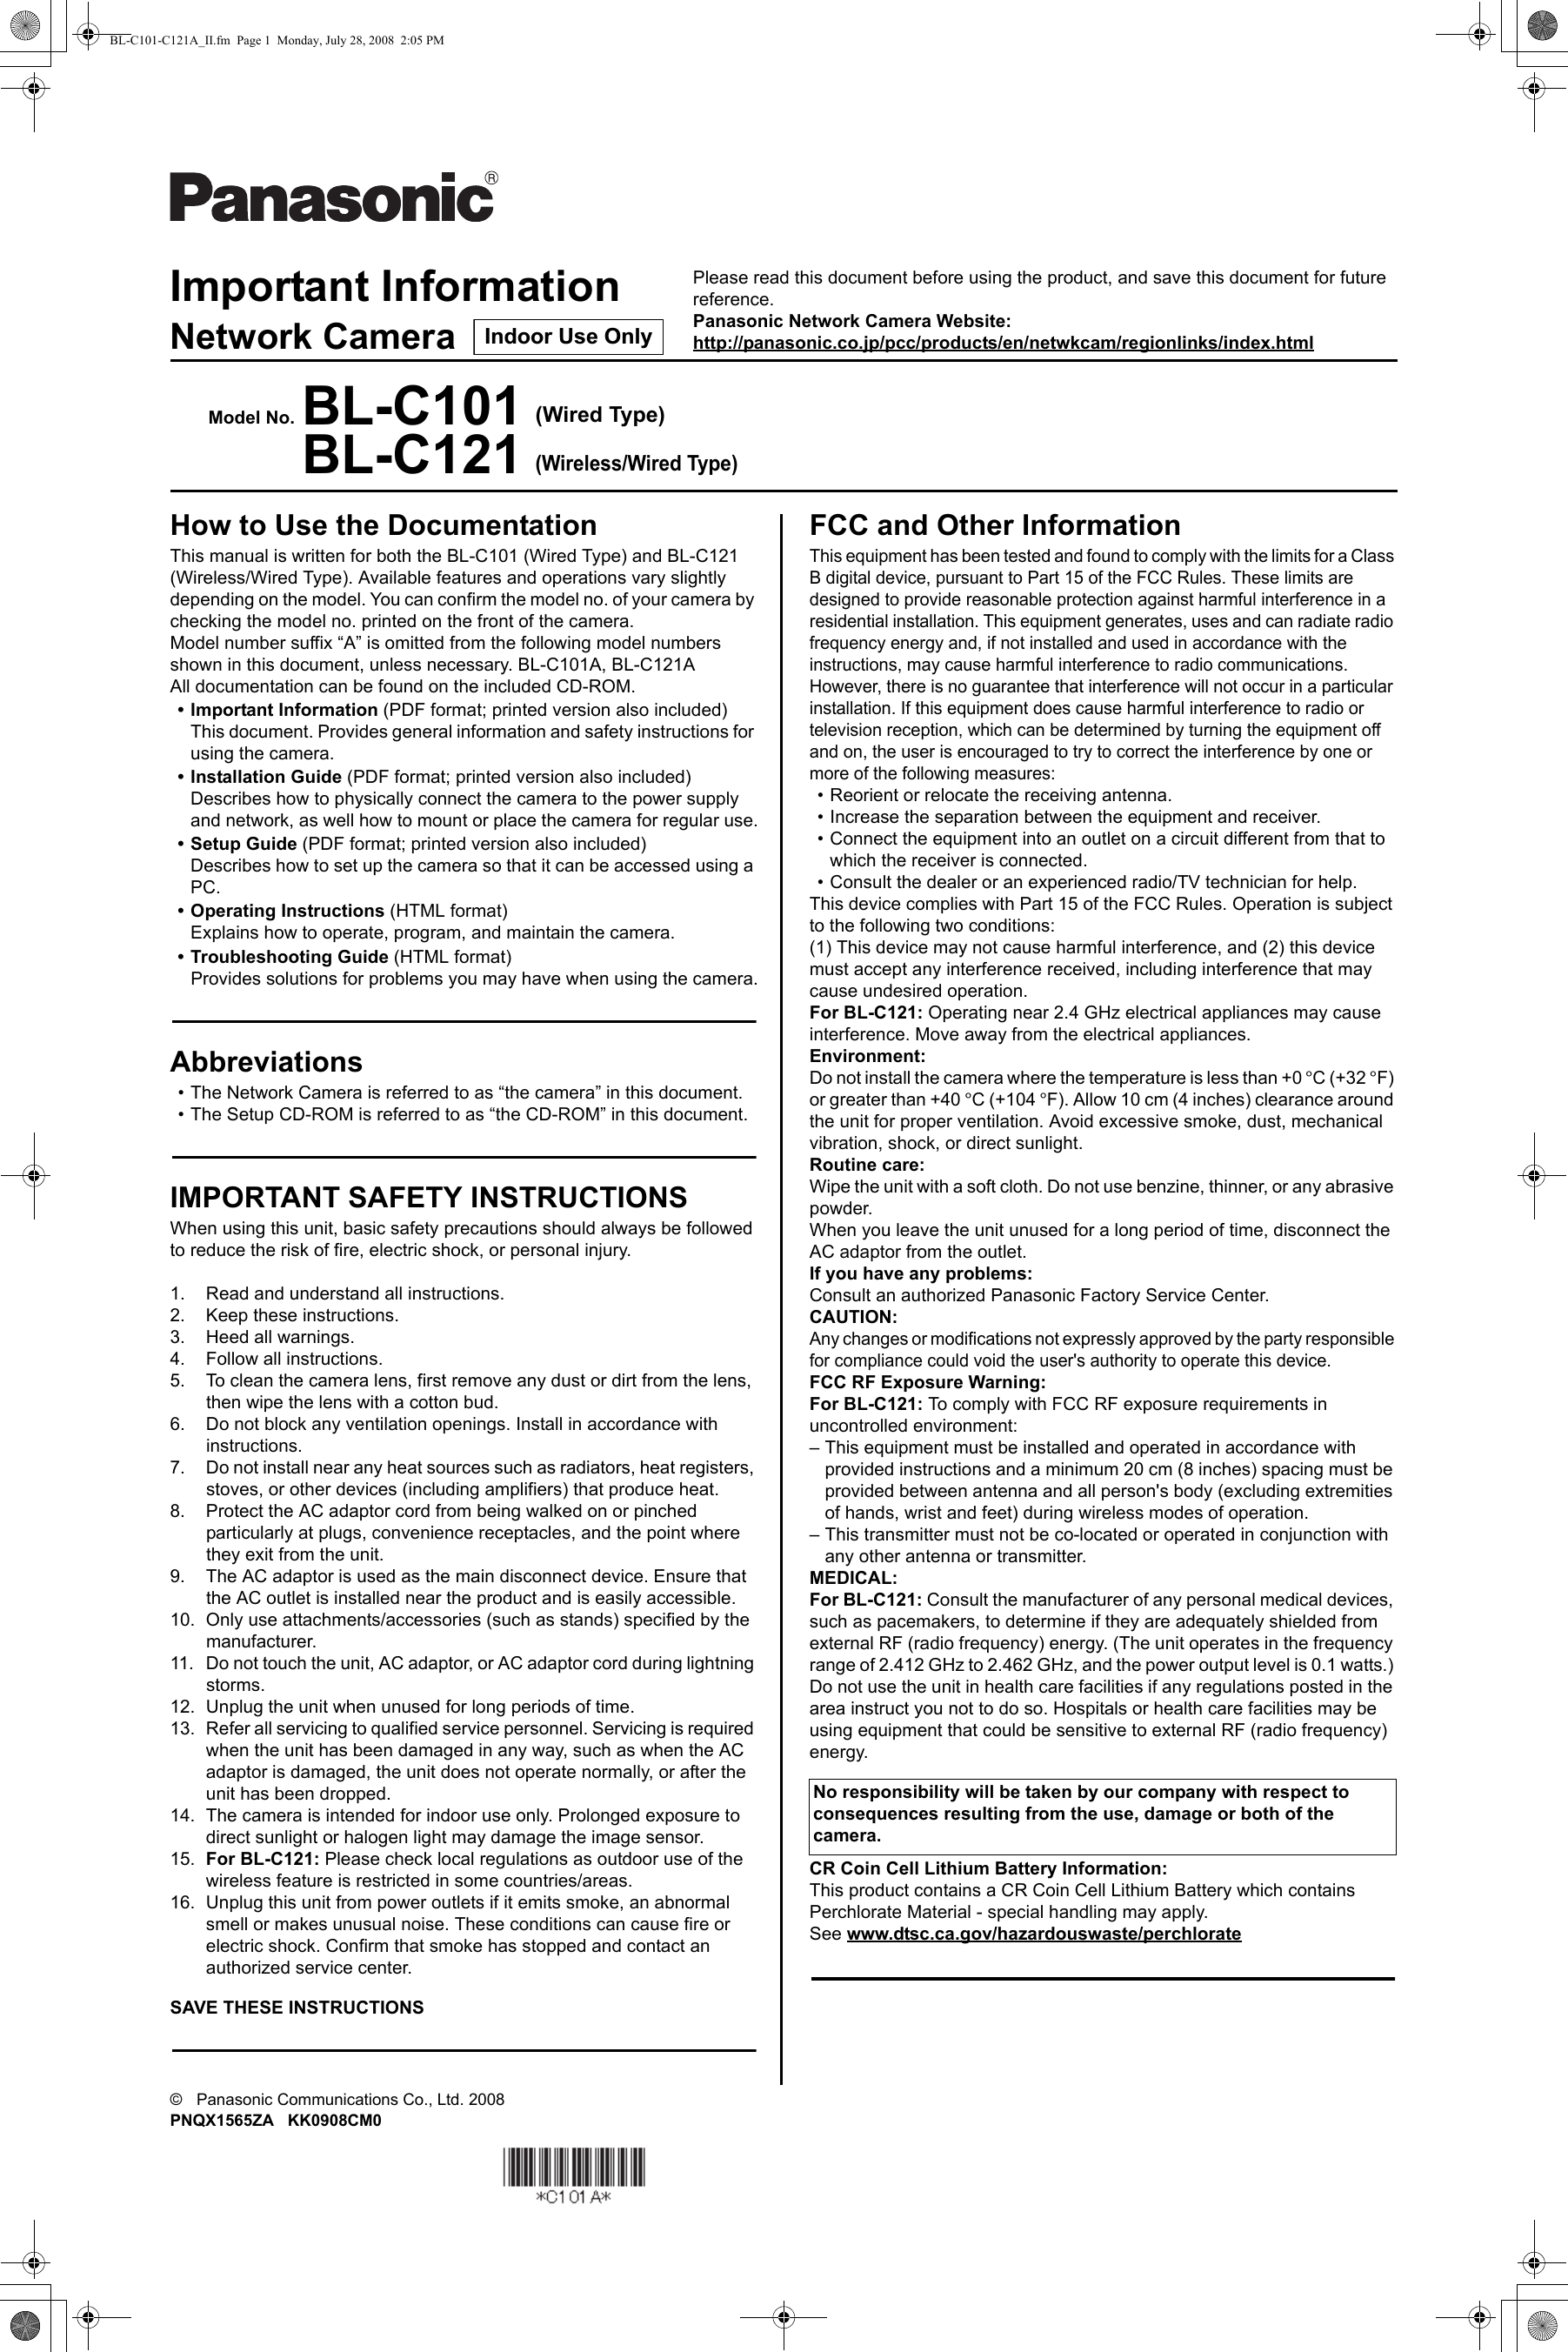 Important InformationNetwork CameraModel No. BL-C101 (Wired Type)BL-C121(Wireless/Wired Type)©    Panasonic Communications Co., Ltd. 2008 PNQX1565ZA   KK0908CM0How to Use the DocumentationThis manual is written for both the BL-C101 (Wired Type) and BL-C121 (Wireless/Wired Type). Available features and operations vary slightly depending on the model. You can confirm the model no. of your camera by checking the model no. printed on the front of the camera.Model number suffix “A” is omitted from the following model numbers shown in this document, unless necessary. BL-C101A, BL-C121AAll documentation can be found on the included CD-ROM.• Important Information (PDF format; printed version also included)This document. Provides general information and safety instructions for using the camera.• Installation Guide (PDF format; printed version also included)Describes how to physically connect the camera to the power supply and network, as well how to mount or place the camera for regular use.• Setup Guide (PDF format; printed version also included)Describes how to set up the camera so that it can be accessed using a PC.• Operating Instructions (HTML format)Explains how to operate, program, and maintain the camera.• Troubleshooting Guide (HTML format)Provides solutions for problems you may have when using the camera.Abbreviations• The Network Camera is referred to as “the camera” in this document.• The Setup CD-ROM is referred to as “the CD-ROM” in this document.IMPORTANT SAFETY INSTRUCTIONSWhen using this unit, basic safety precautions should always be followed to reduce the risk of fire, electric shock, or personal injury.1. Read and understand all instructions.2. Keep these instructions.3. Heed all warnings.4. Follow all instructions.5. To clean the camera lens, first remove any dust or dirt from the lens, then wipe the lens with a cotton bud.6. Do not block any ventilation openings. Install in accordance with instructions.7. Do not install near any heat sources such as radiators, heat registers, stoves, or other devices (including amplifiers) that produce heat.8. Protect the AC adaptor cord from being walked on or pinched particularly at plugs, convenience receptacles, and the point where they exit from the unit.9. The AC adaptor is used as the main disconnect device. Ensure that the AC outlet is installed near the product and is easily accessible.10. Only use attachments/accessories (such as stands) specified by the manufacturer.11. Do not touch the unit, AC adaptor, or AC adaptor cord during lightning storms.12. Unplug the unit when unused for long periods of time.13. Refer all servicing to qualified service personnel. Servicing is required when the unit has been damaged in any way, such as when the AC adaptor is damaged, the unit does not operate normally, or after the unit has been dropped.14. The camera is intended for indoor use only. Prolonged exposure to direct sunlight or halogen light may damage the image sensor.15. For BL-C121: Please check local regulations as outdoor use of the wireless feature is restricted in some countries/areas.16. Unplug this unit from power outlets if it emits smoke, an abnormal smell or makes unusual noise. These conditions can cause fire or electric shock. Confirm that smoke has stopped and contact an authorized service center.SAVE THESE INSTRUCTIONSFCC and Other InformationThis equipment has been tested and found to comply with the limits for a Class B digital device, pursuant to Part 15 of the FCC Rules. These limits are designed to provide reasonable protection against harmful interference in a residential installation. This equipment generates, uses and can radiate radio frequency energy and, if not installed and used in accordance with the instructions, may cause harmful interference to radio communications.However, there is no guarantee that interference will not occur in a particular installation. If this equipment does cause harmful interference to radio or television reception, which can be determined by turning the equipment off and on, the user is encouraged to try to correct the interference by one or more of the following measures:• Reorient or relocate the receiving antenna.• Increase the separation between the equipment and receiver.• Connect the equipment into an outlet on a circuit different from that to which the receiver is connected.• Consult the dealer or an experienced radio/TV technician for help.This device complies with Part 15 of the FCC Rules. Operation is subject to the following two conditions:(1) This device may not cause harmful interference, and (2) this device must accept any interference received, including interference that may cause undesired operation.For BL-C121: Operating near 2.4 GHz electrical appliances may cause interference. Move away from the electrical appliances.Environment:Do not install the camera where the temperature is less than +0 °C (+32 °F) or greater than +40 °C (+104 °F). Allow 10 cm (4 inches) clearance around the unit for proper ventilation. Avoid excessive smoke, dust, mechanical vibration, shock, or direct sunlight.Routine care:Wipe the unit with a soft cloth. Do not use benzine, thinner, or any abrasive powder.When you leave the unit unused for a long period of time, disconnect the AC adaptor from the outlet.If you have any problems:Consult an authorized Panasonic Factory Service Center.CAUTION:Any changes or modifications not expressly approved by the party responsible for compliance could void the user&apos;s authority to operate this device.FCC RF Exposure Warning:For BL-C121: To comply with FCC RF exposure requirements in uncontrolled environment:– This equipment must be installed and operated in accordance with provided instructions and a minimum 20 cm (8 inches) spacing must be provided between antenna and all person&apos;s body (excluding extremities of hands, wrist and feet) during wireless modes of operation.– This transmitter must not be co-located or operated in conjunction with any other antenna or transmitter.MEDICAL:For BL-C121: Consult the manufacturer of any personal medical devices, such as pacemakers, to determine if they are adequately shielded from external RF (radio frequency) energy. (The unit operates in the frequency range of 2.412 GHz to 2.462 GHz, and the power output level is 0.1 watts.) Do not use the unit in health care facilities if any regulations posted in the area instruct you not to do so. Hospitals or health care facilities may be using equipment that could be sensitive to external RF (radio frequency) energy.CR Coin Cell Lithium Battery Information:This product contains a CR Coin Cell Lithium Battery which contains Perchlorate Material - special handling may apply.See www.dtsc.ca.gov/hazardouswaste/perchlorateNo responsibility will be taken by our company with respect to consequences resulting from the use, damage or both of the camera.Please read this document before using the product, and save this document for future reference. Panasonic Network Camera Website:http://panasonic.co.jp/pcc/products/en/netwkcam/regionlinks/index.htmlIndoor Use OnlyBL-C101-C121A_II.fm  Page 1  Monday, July 28, 2008  2:05 PM